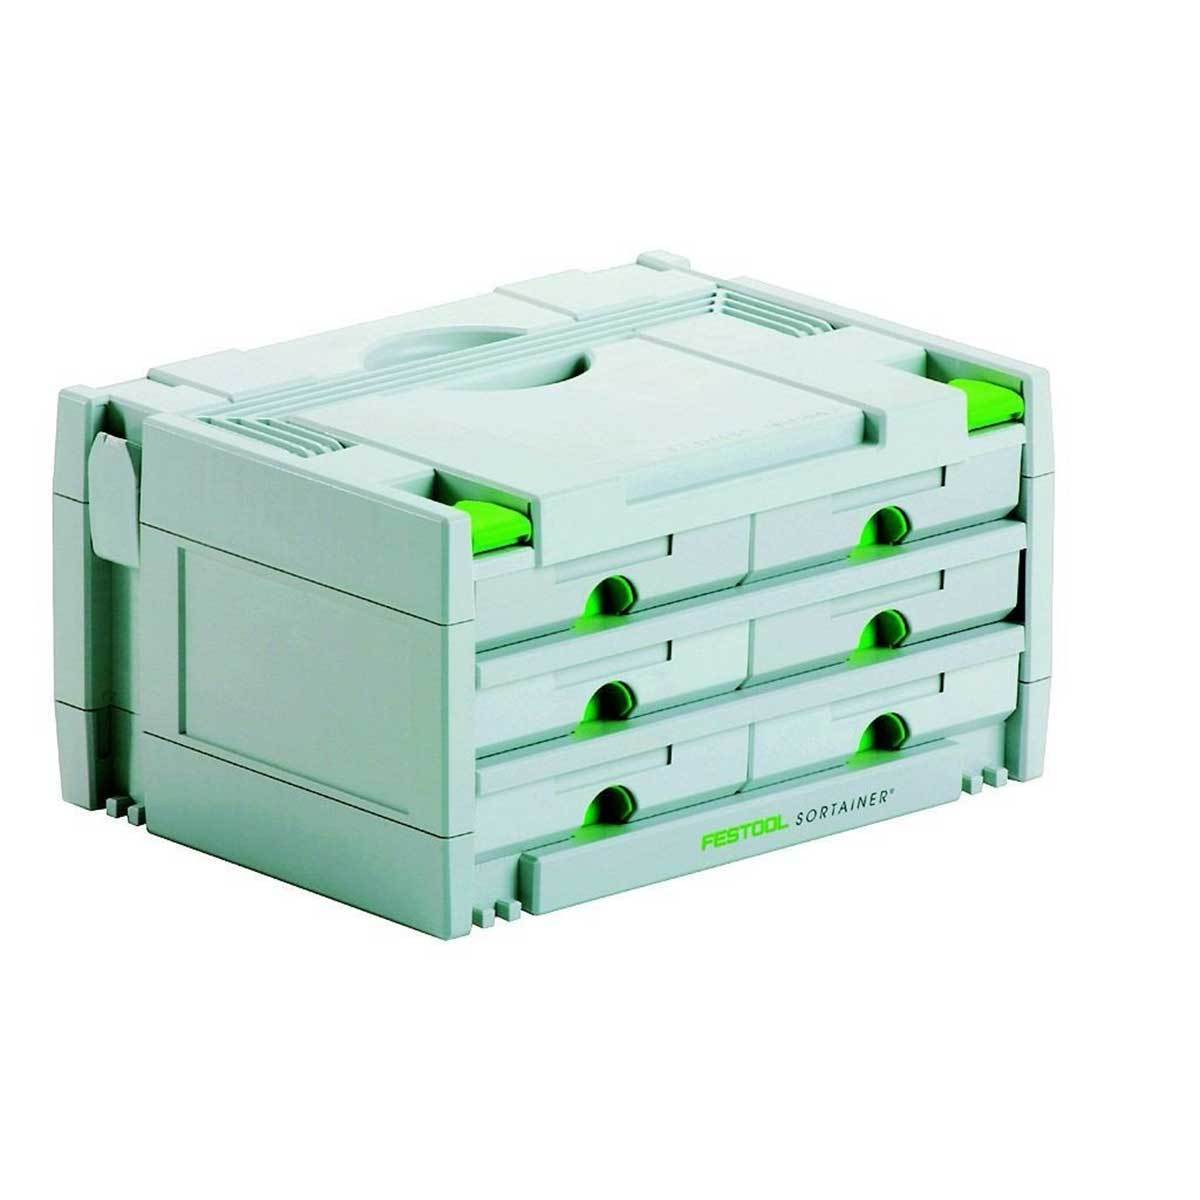 Ultimate Tools Festool Sortainers (Systainers with Drawers)